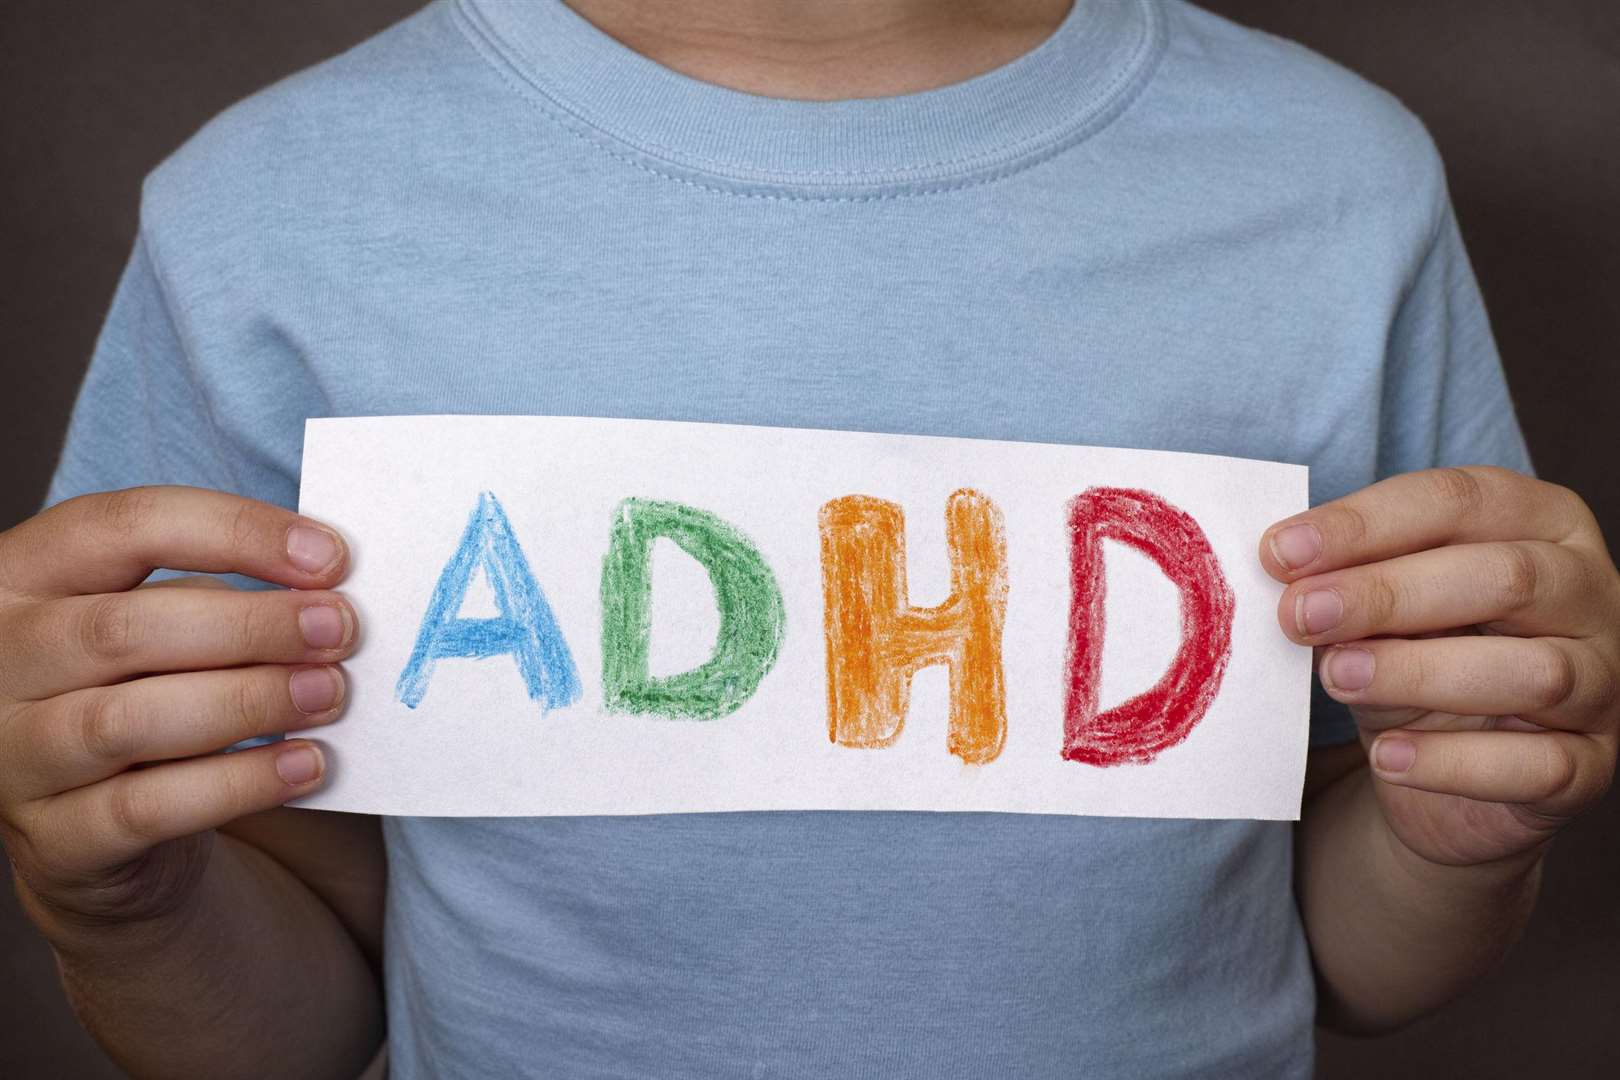 ADHD is the most common behavioural disorder in children